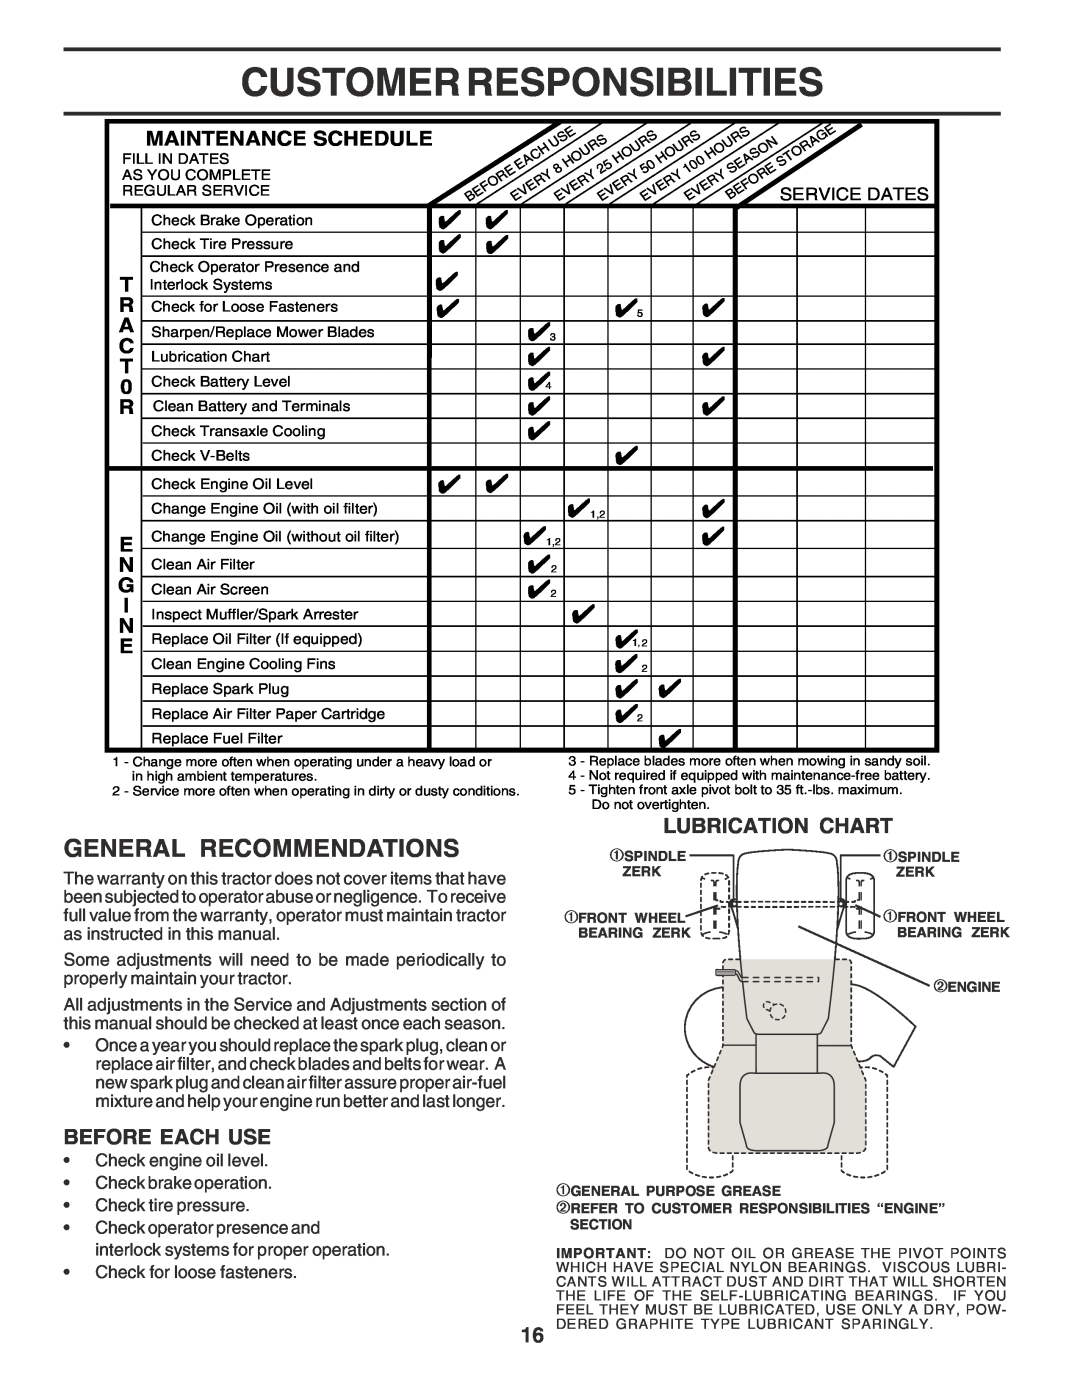 Poulan PPR20H42STC owner manual Customer Responsibilities, General Recommendations, Lubrication Chart, Before Each Use 